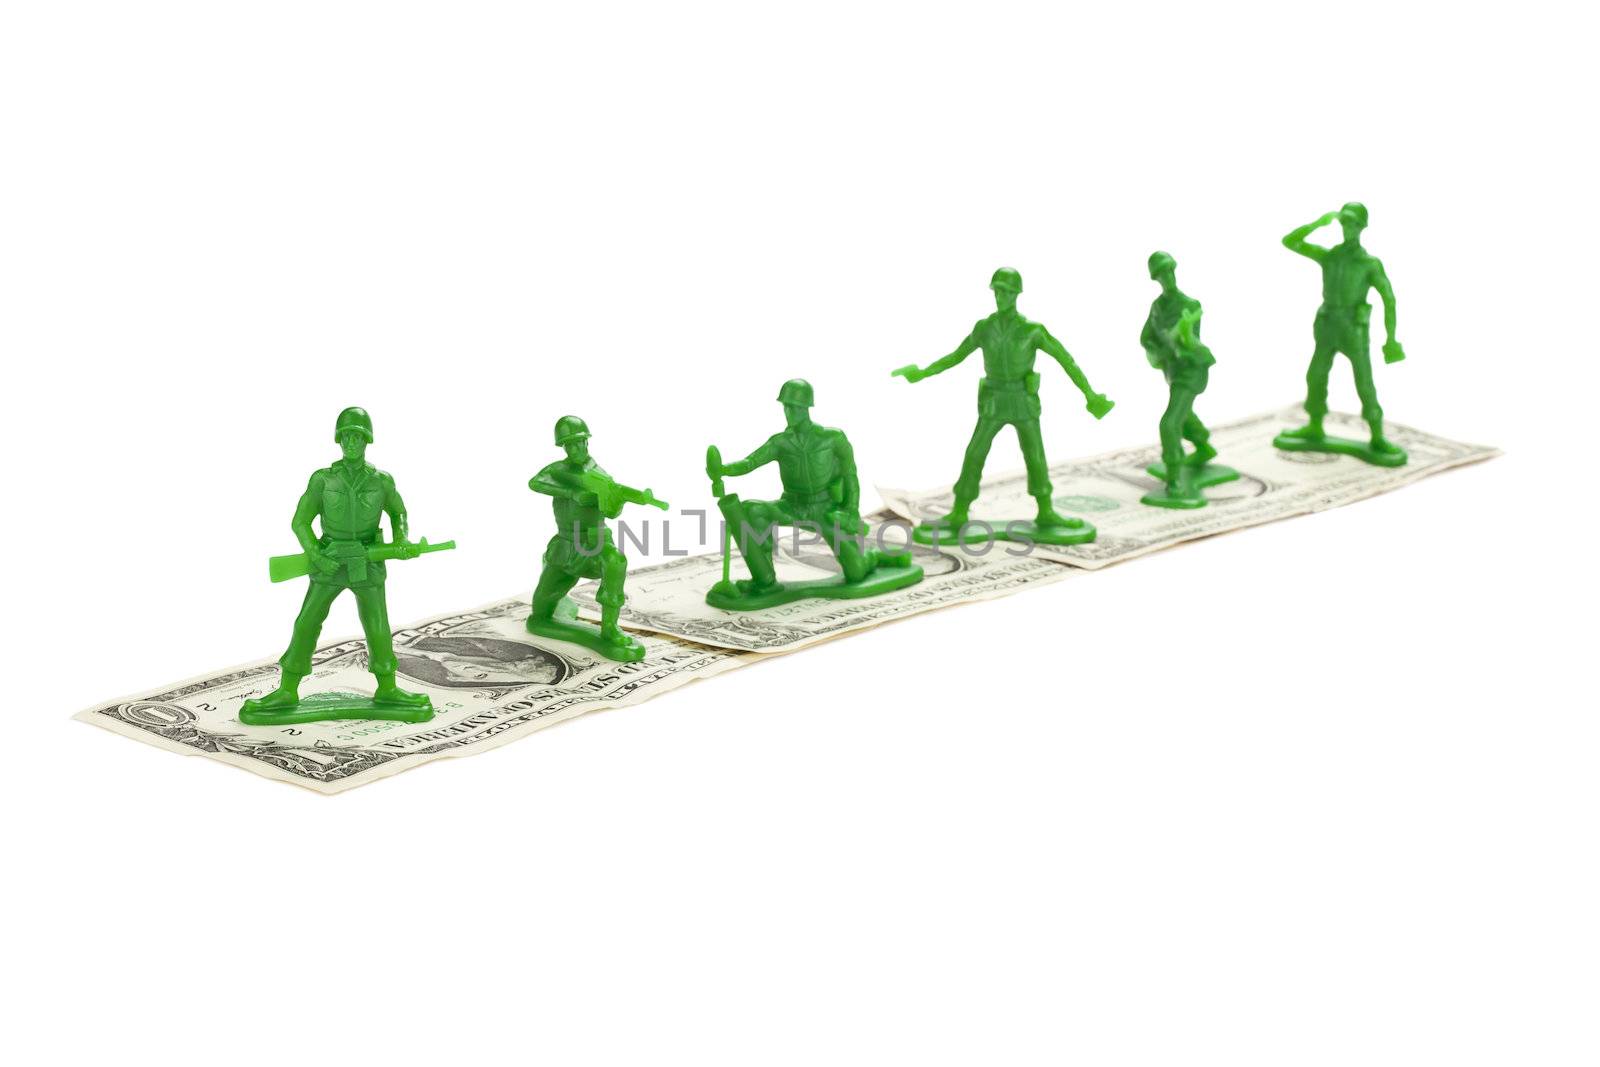 Toy Soldiers standing on a dollar isolated on 